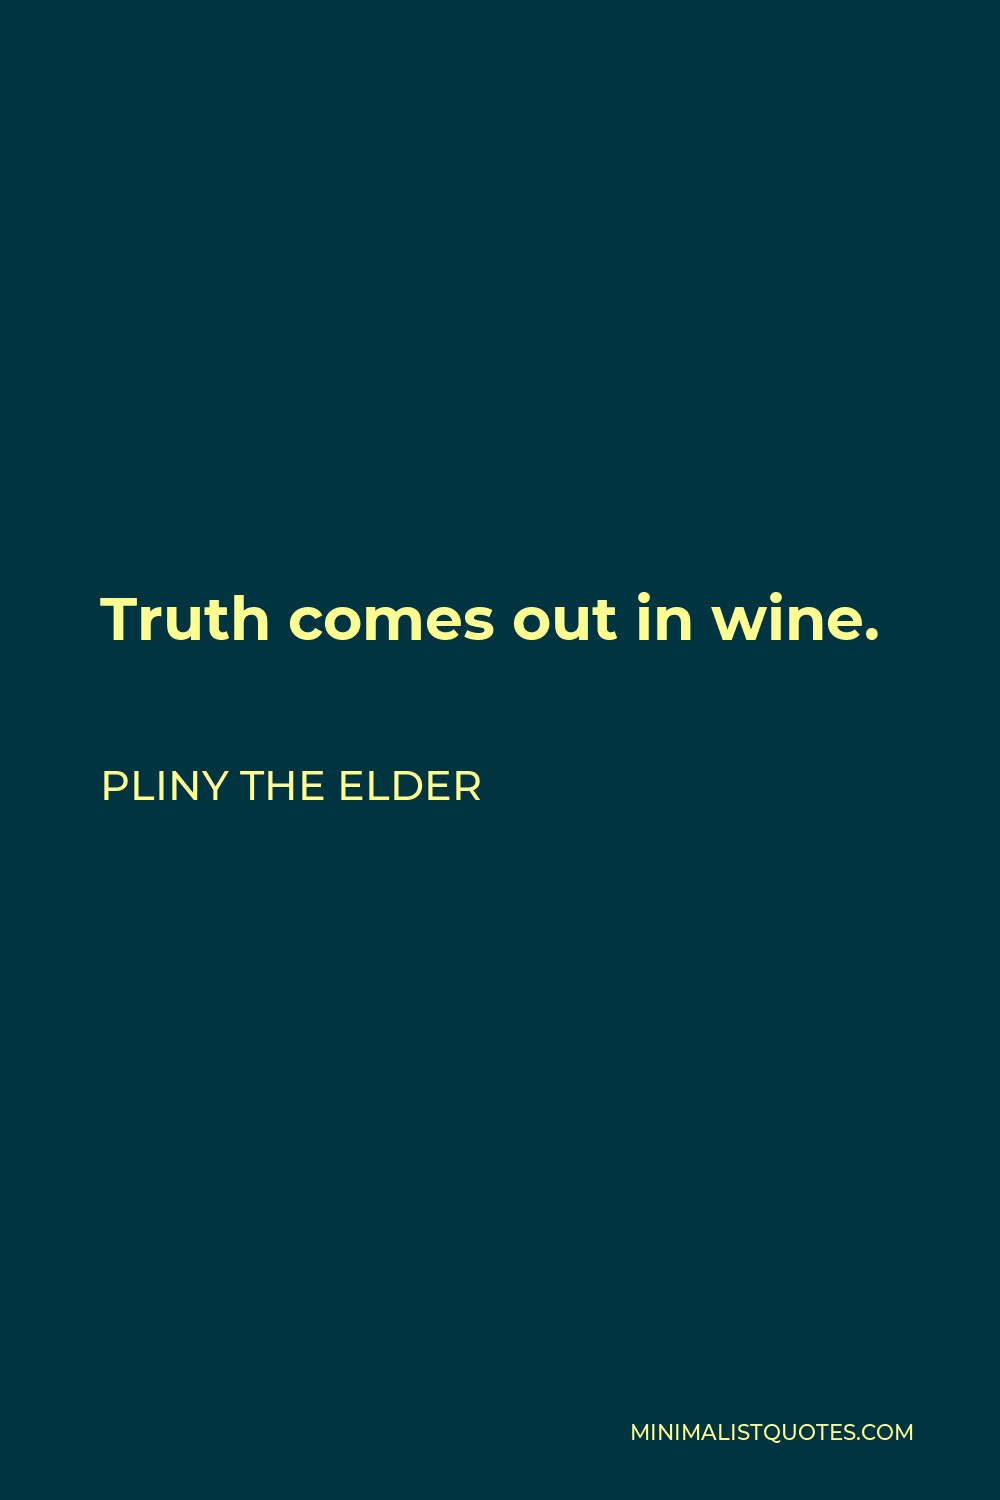 Pliny the Elder Quote - Truth comes out in wine.